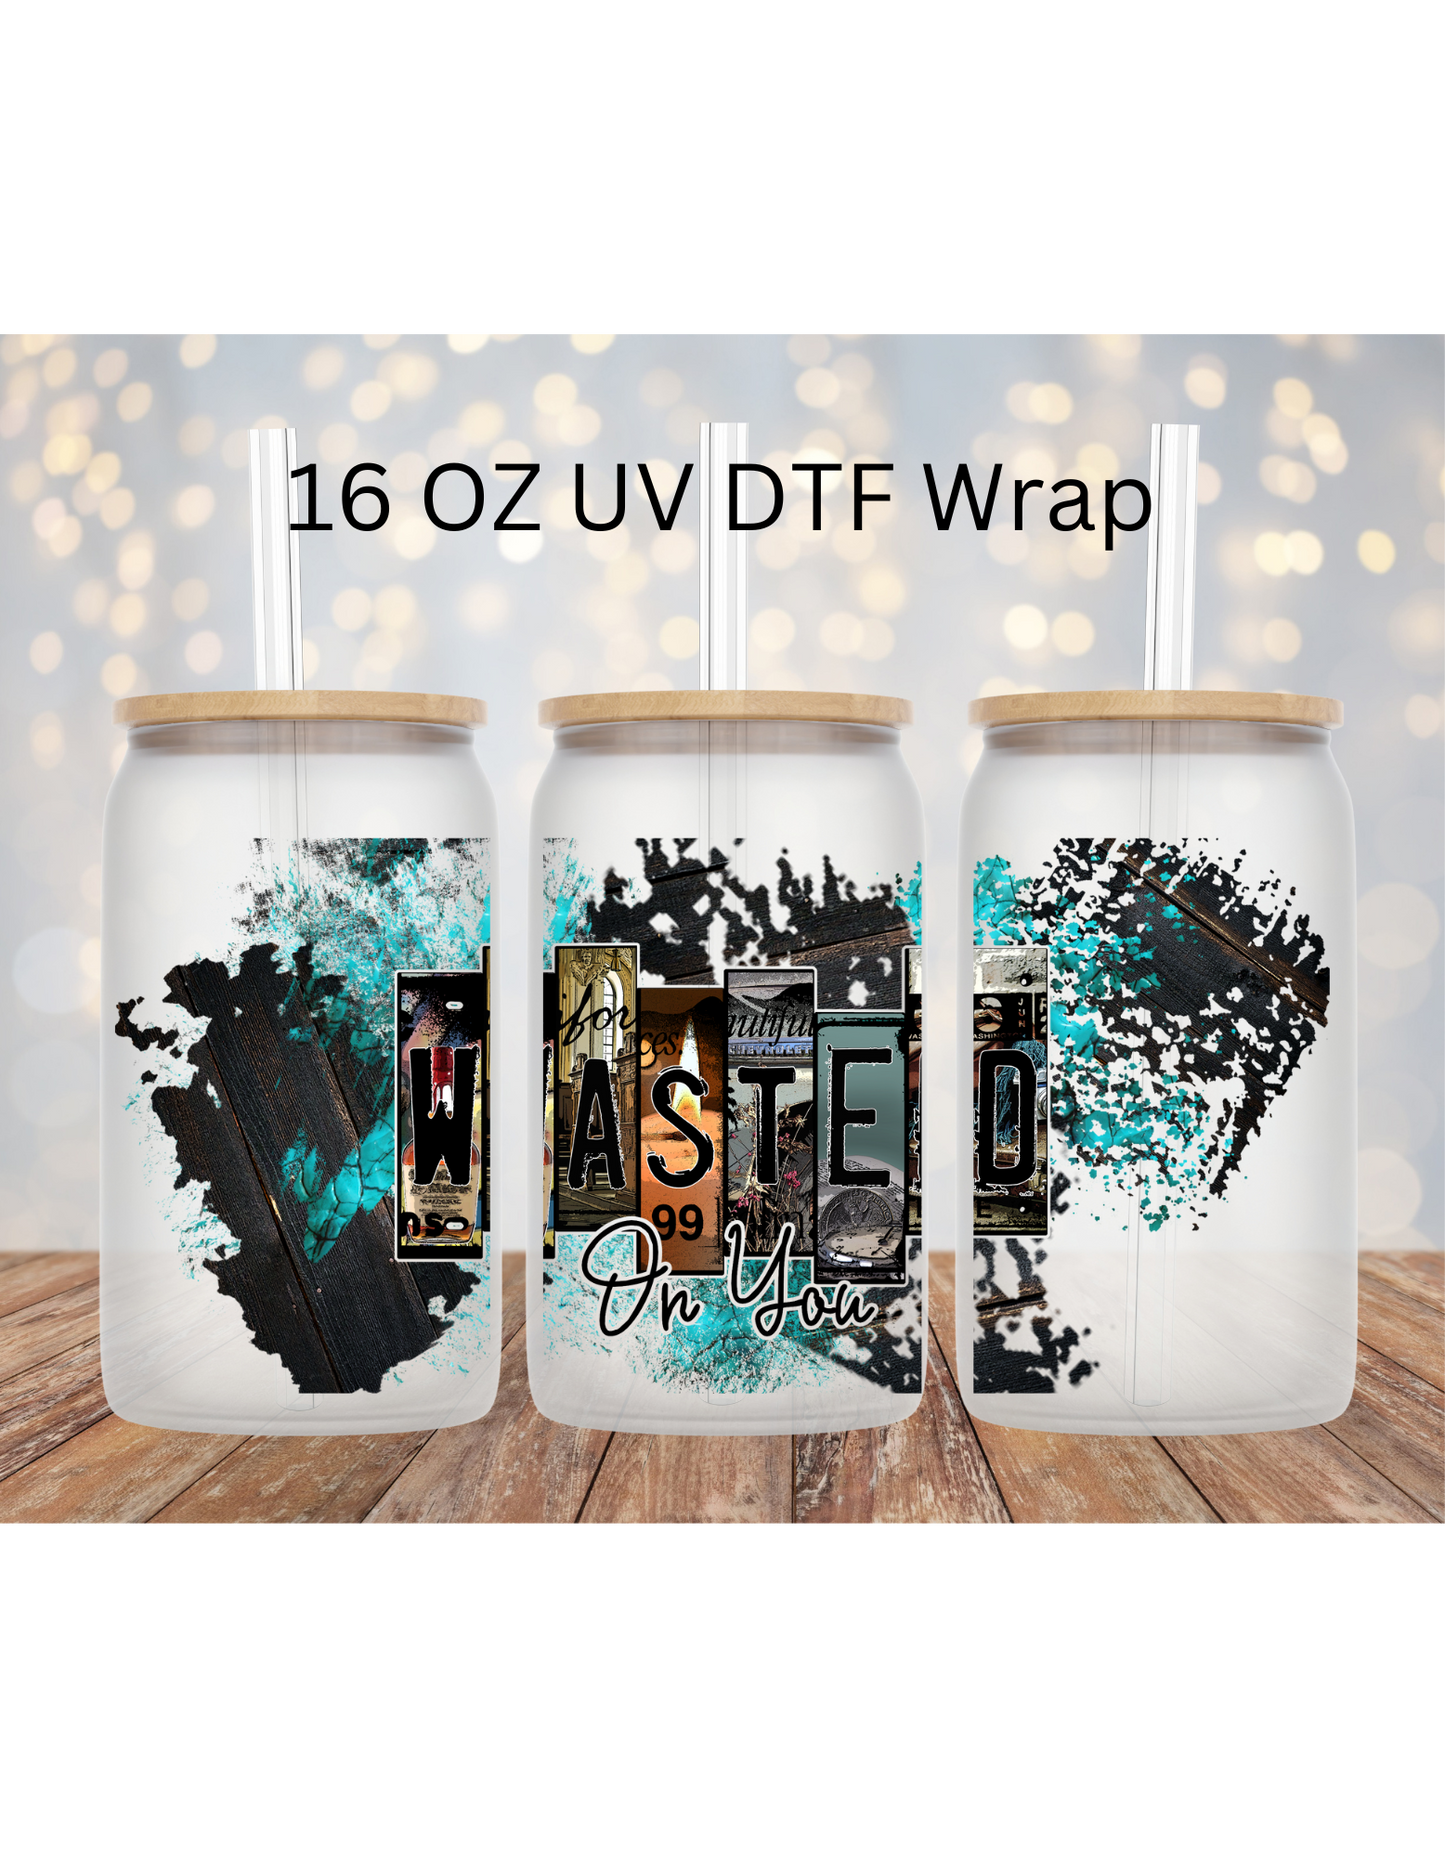 Wasted On You UV DTF 16 OZ Libby Cup Wrap